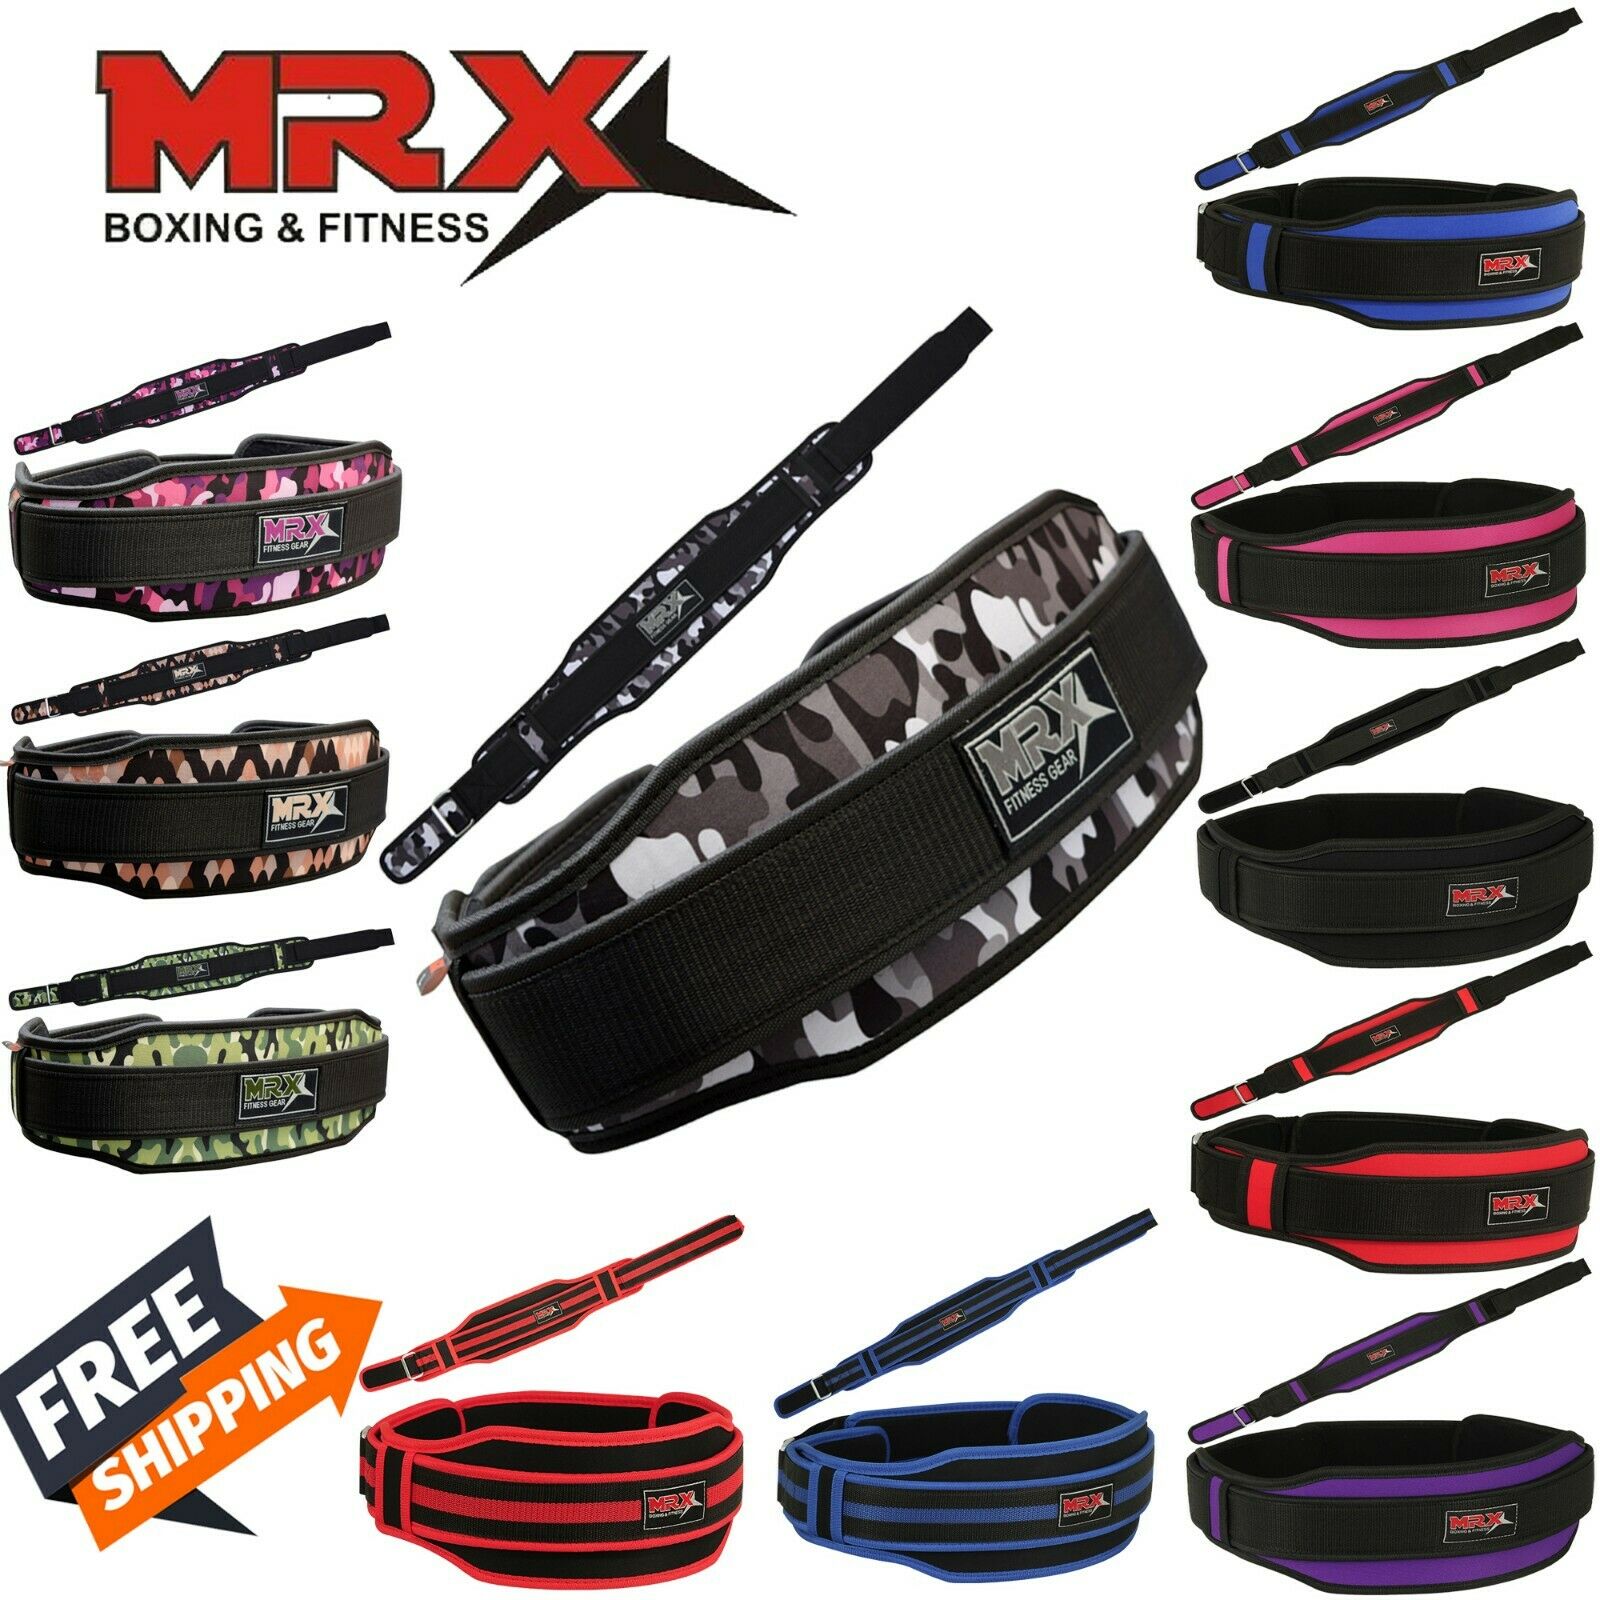 Weight Lifting Belt Training Gym Fitness Bodybuilding Back Support Workout MRX